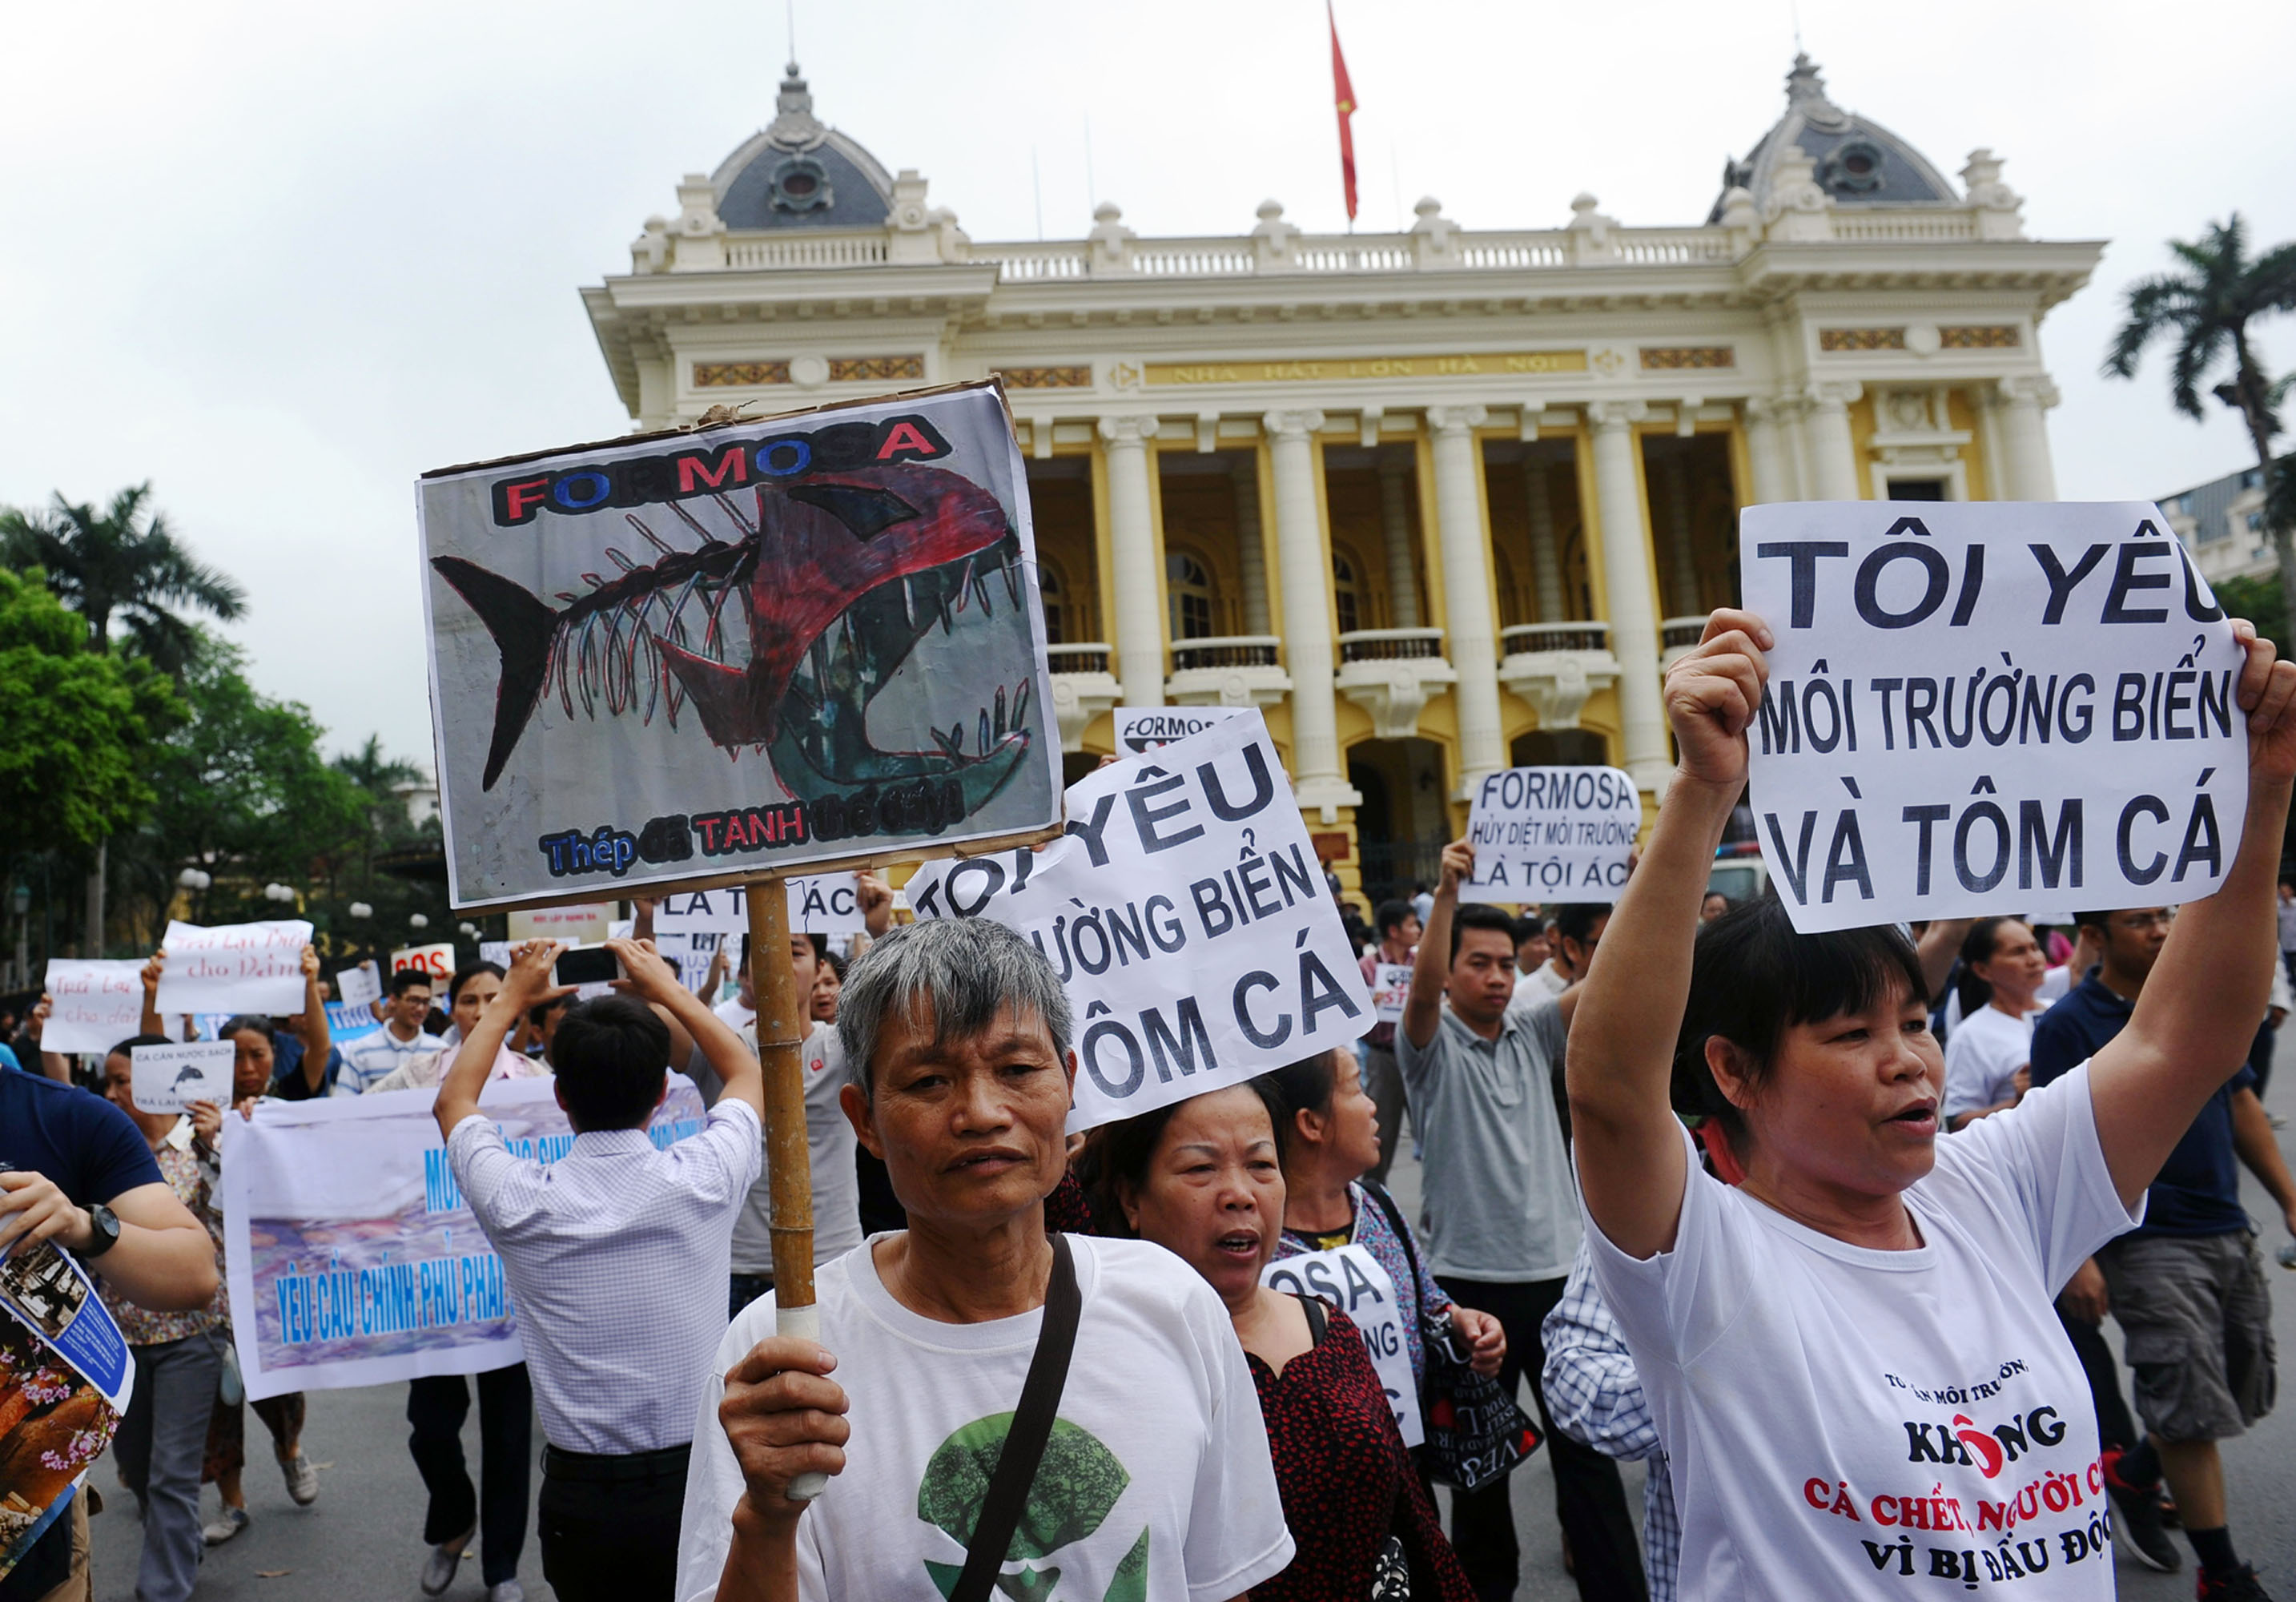 Vietnamese protesters demonstrate against Taiwanese conglomerate Formosa during a rally in downtown Hanoi on May 1.
